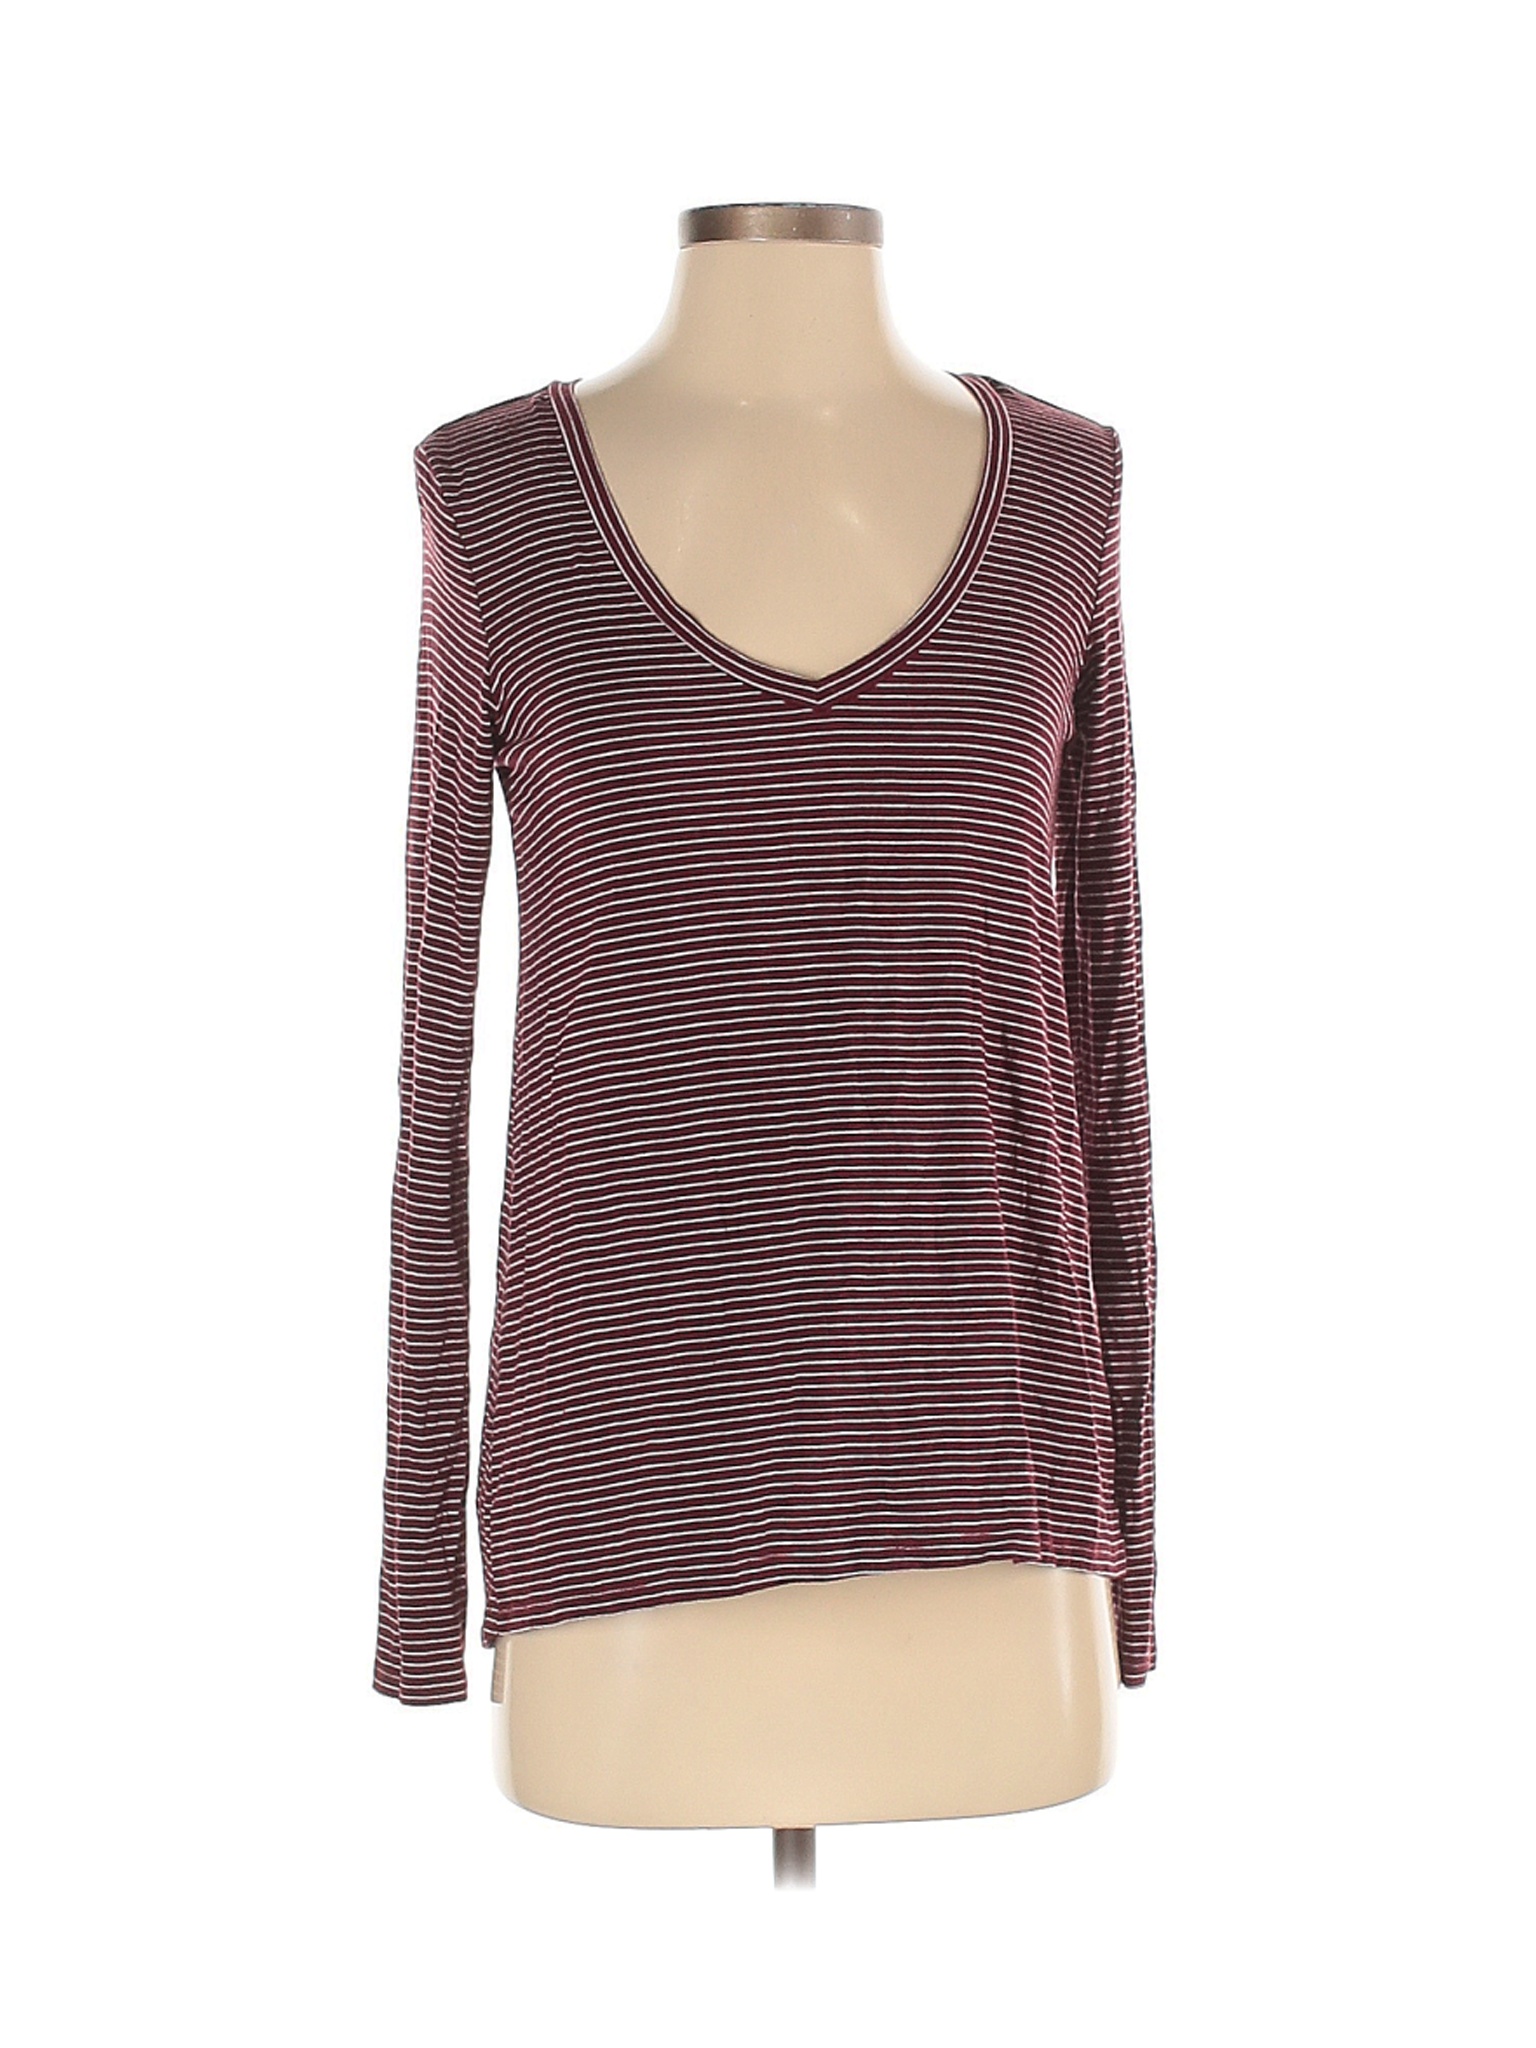 American Eagle Outfitters Women Red Long Sleeve Top XS | eBay